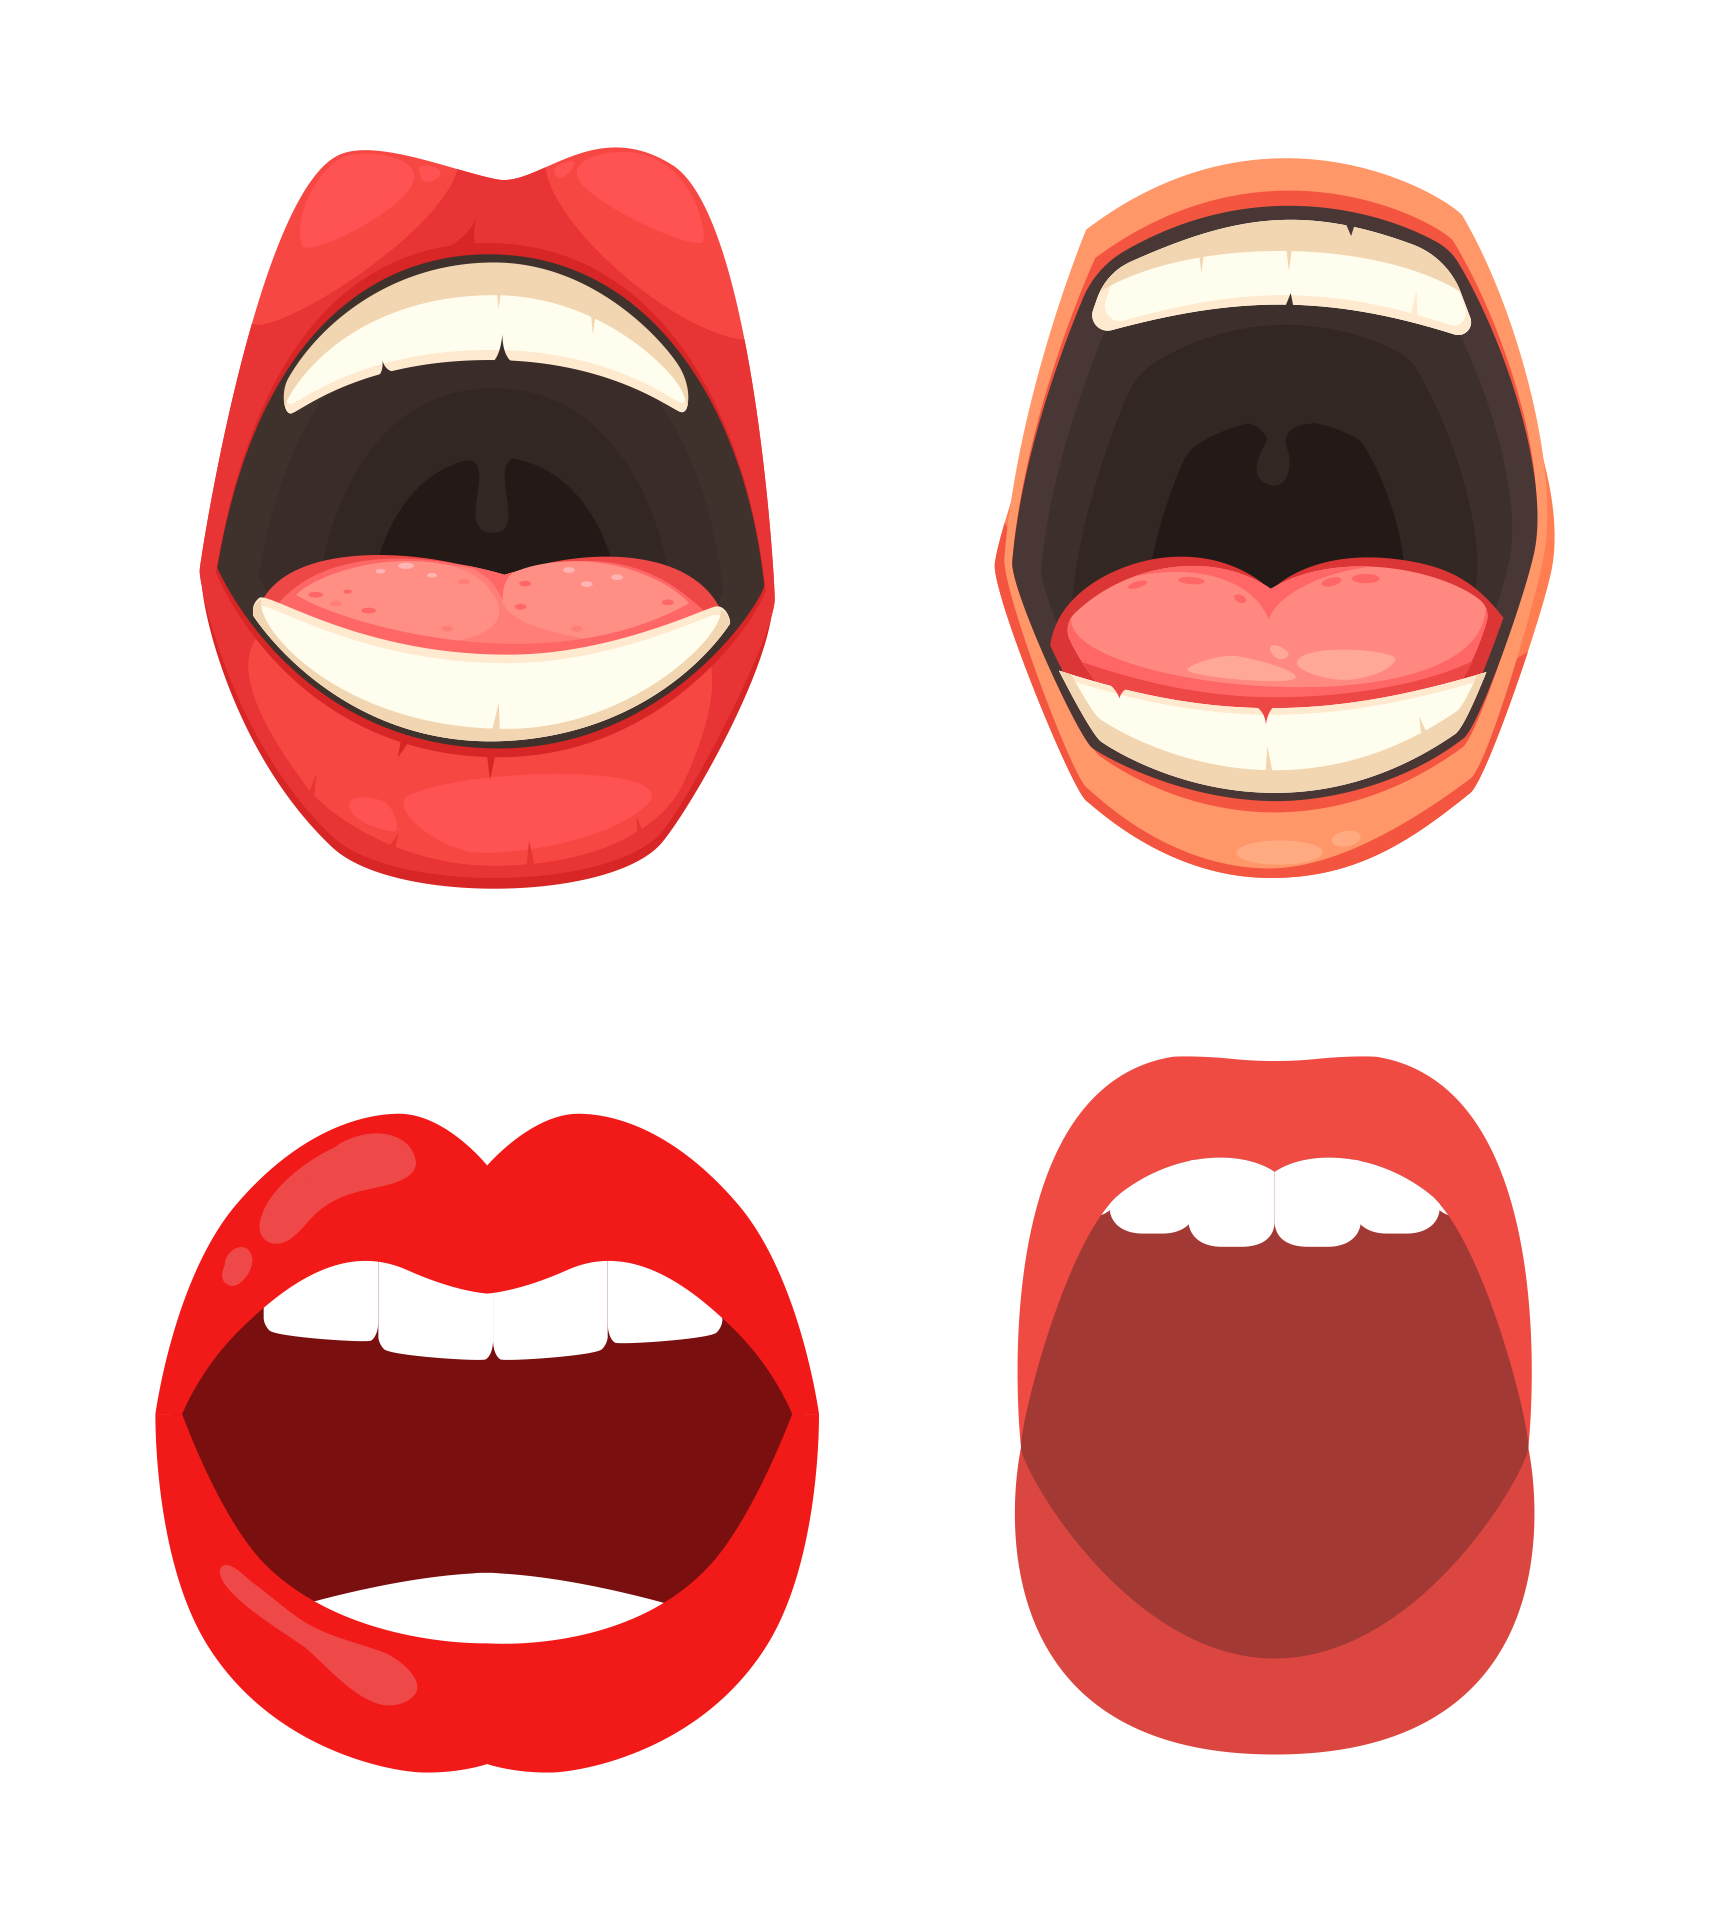 Open Mouth Template Printable